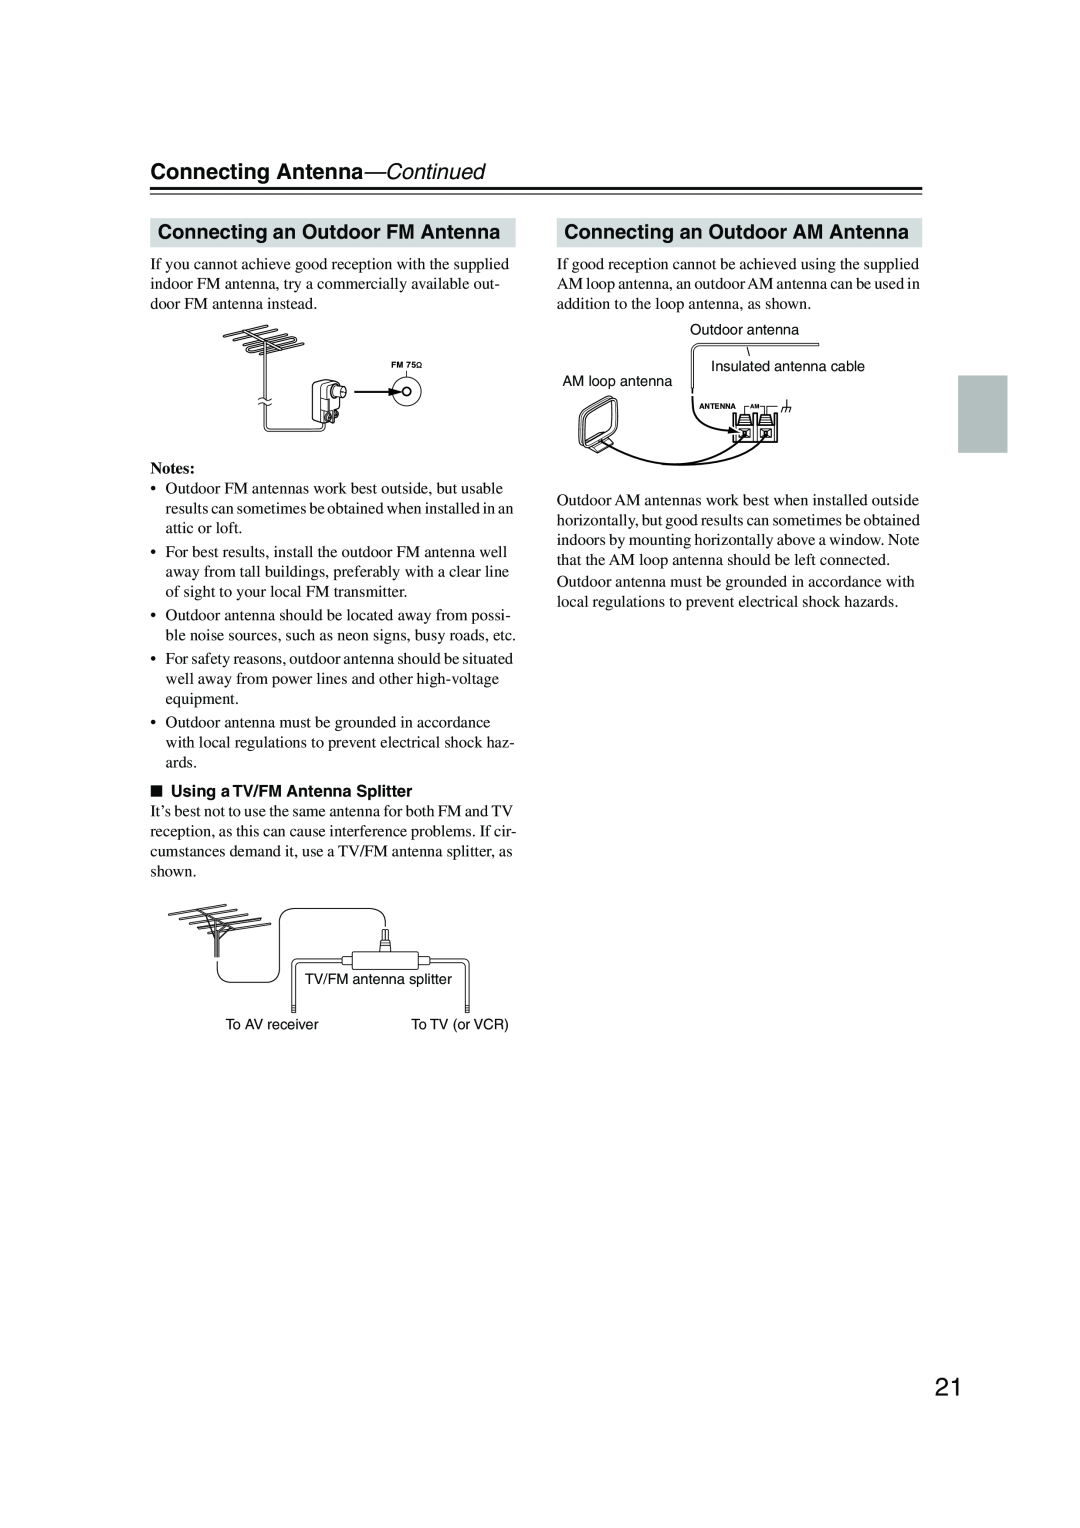 Onkyo HT-S780 Connecting Antenna—Continued, Connecting an Outdoor FM Antenna, Connecting an Outdoor AM Antenna, Notes 